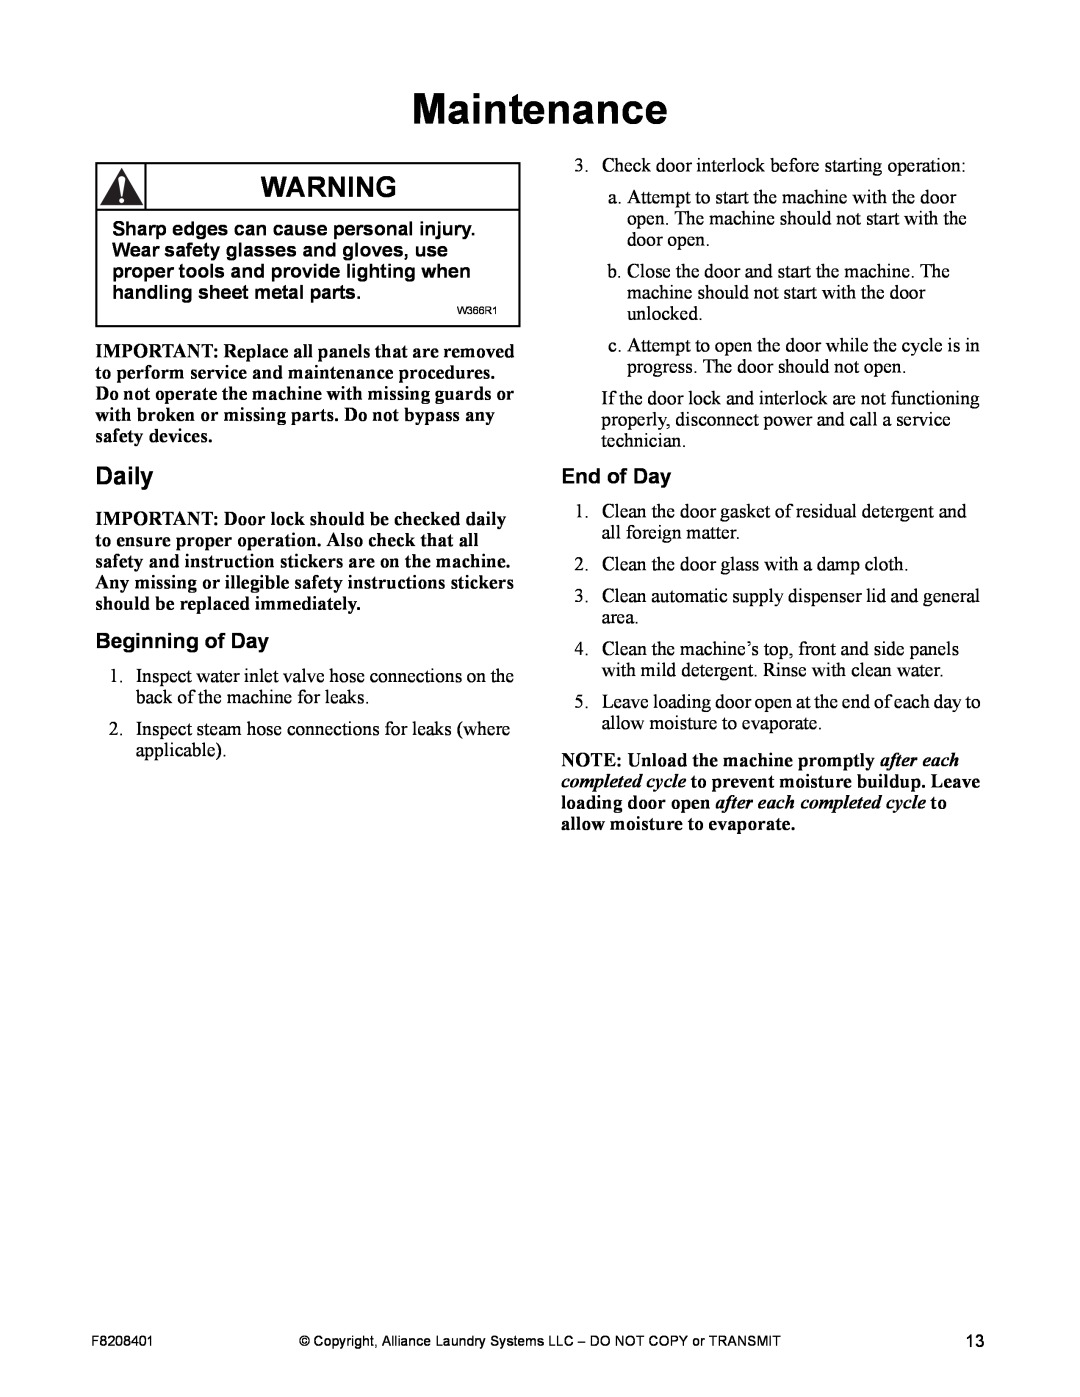 Alliance Laundry Systems CHM1772C manual Maintenance, Daily, Beginning of Day, End of Day 